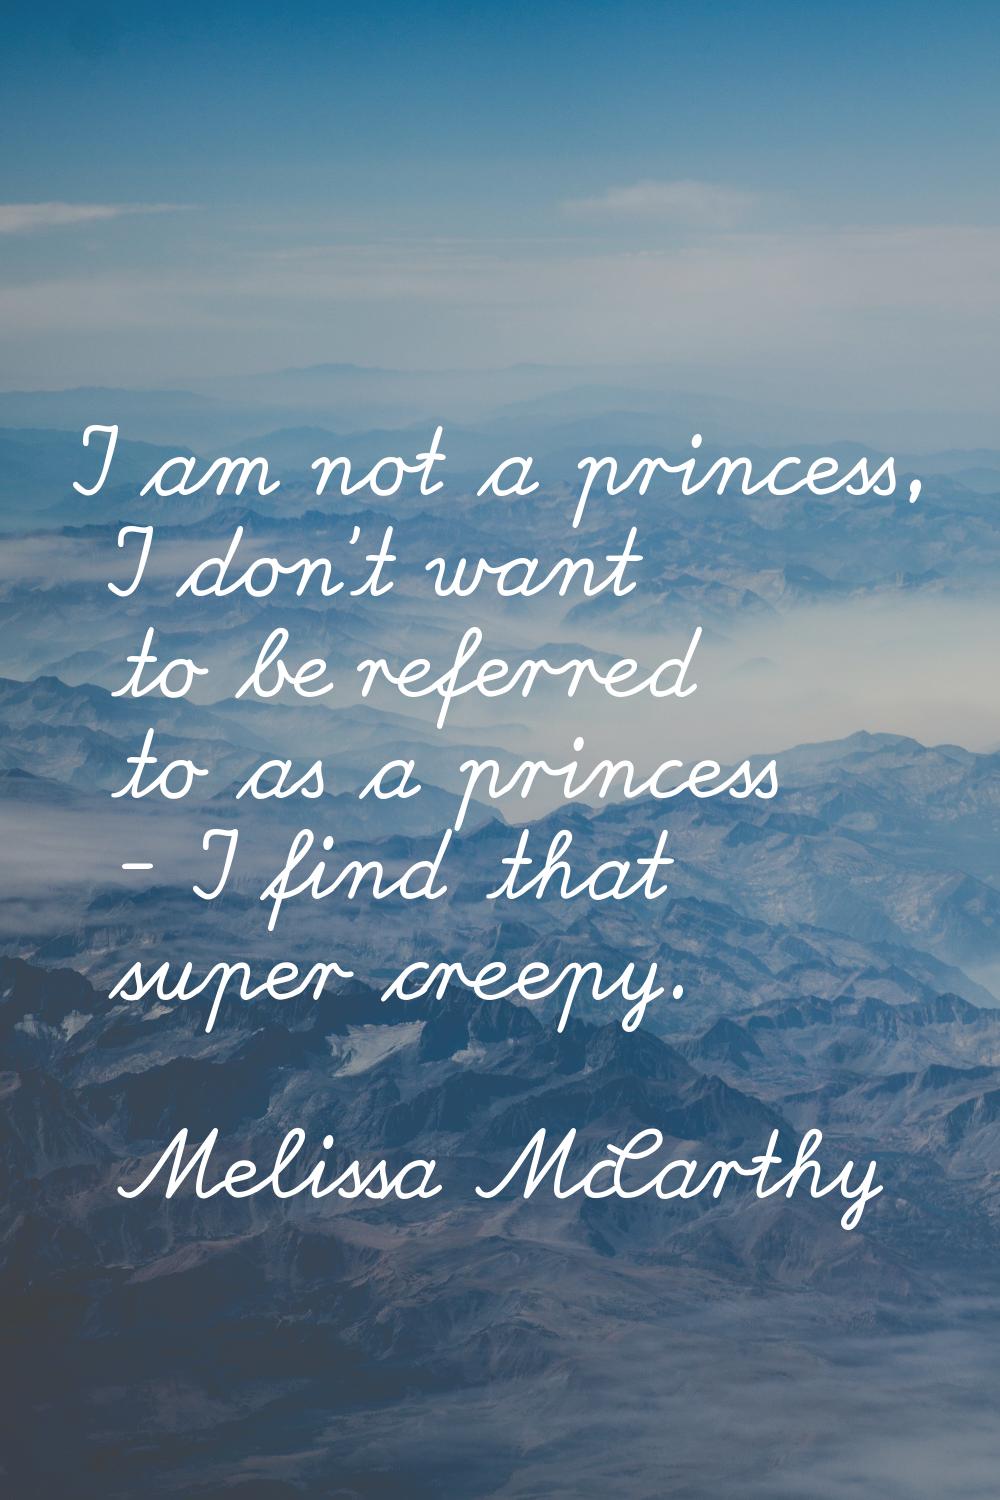 I am not a princess, I don't want to be referred to as a princess - I find that super creepy.